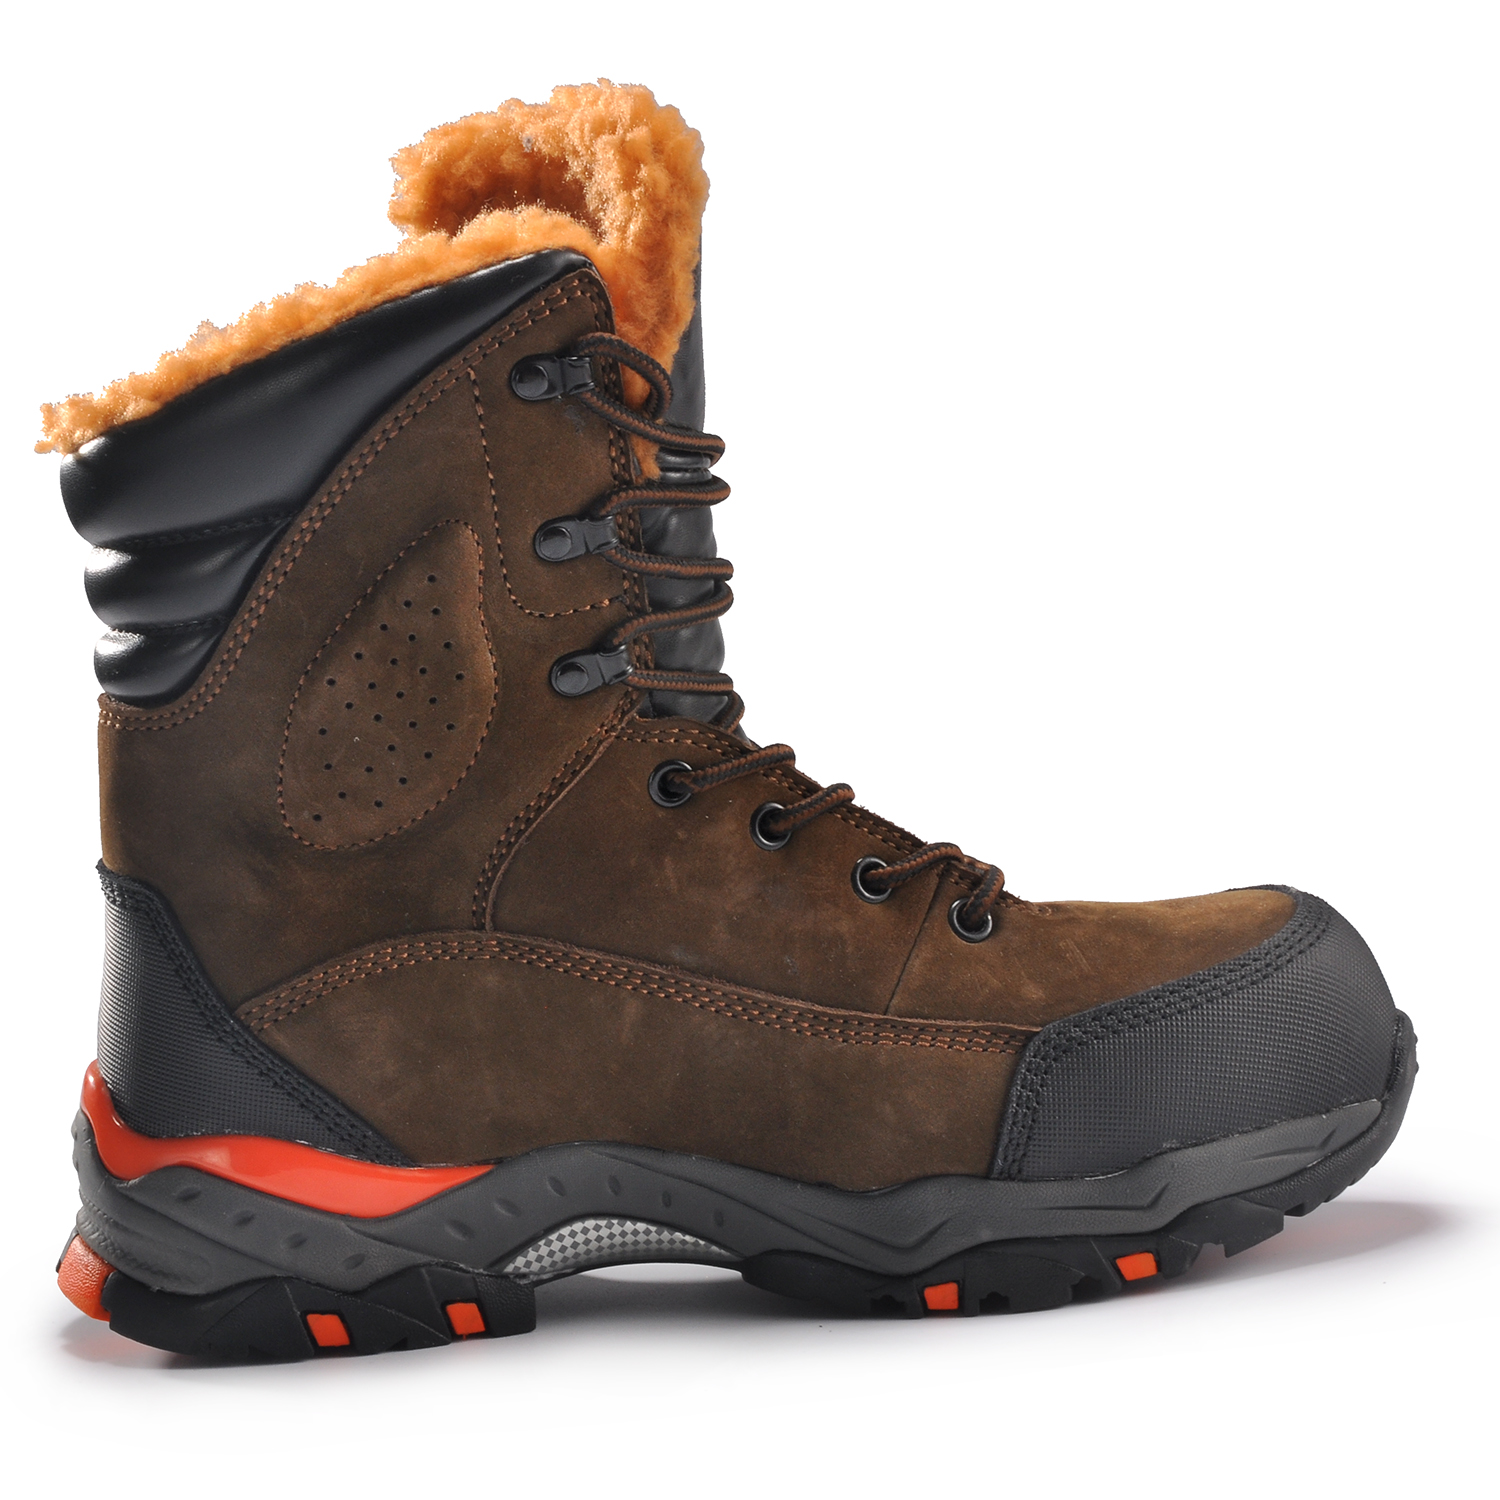 Insulated Fur Lined Rigger Winter Steel Toe Safety Work Boots H-9537 Winter